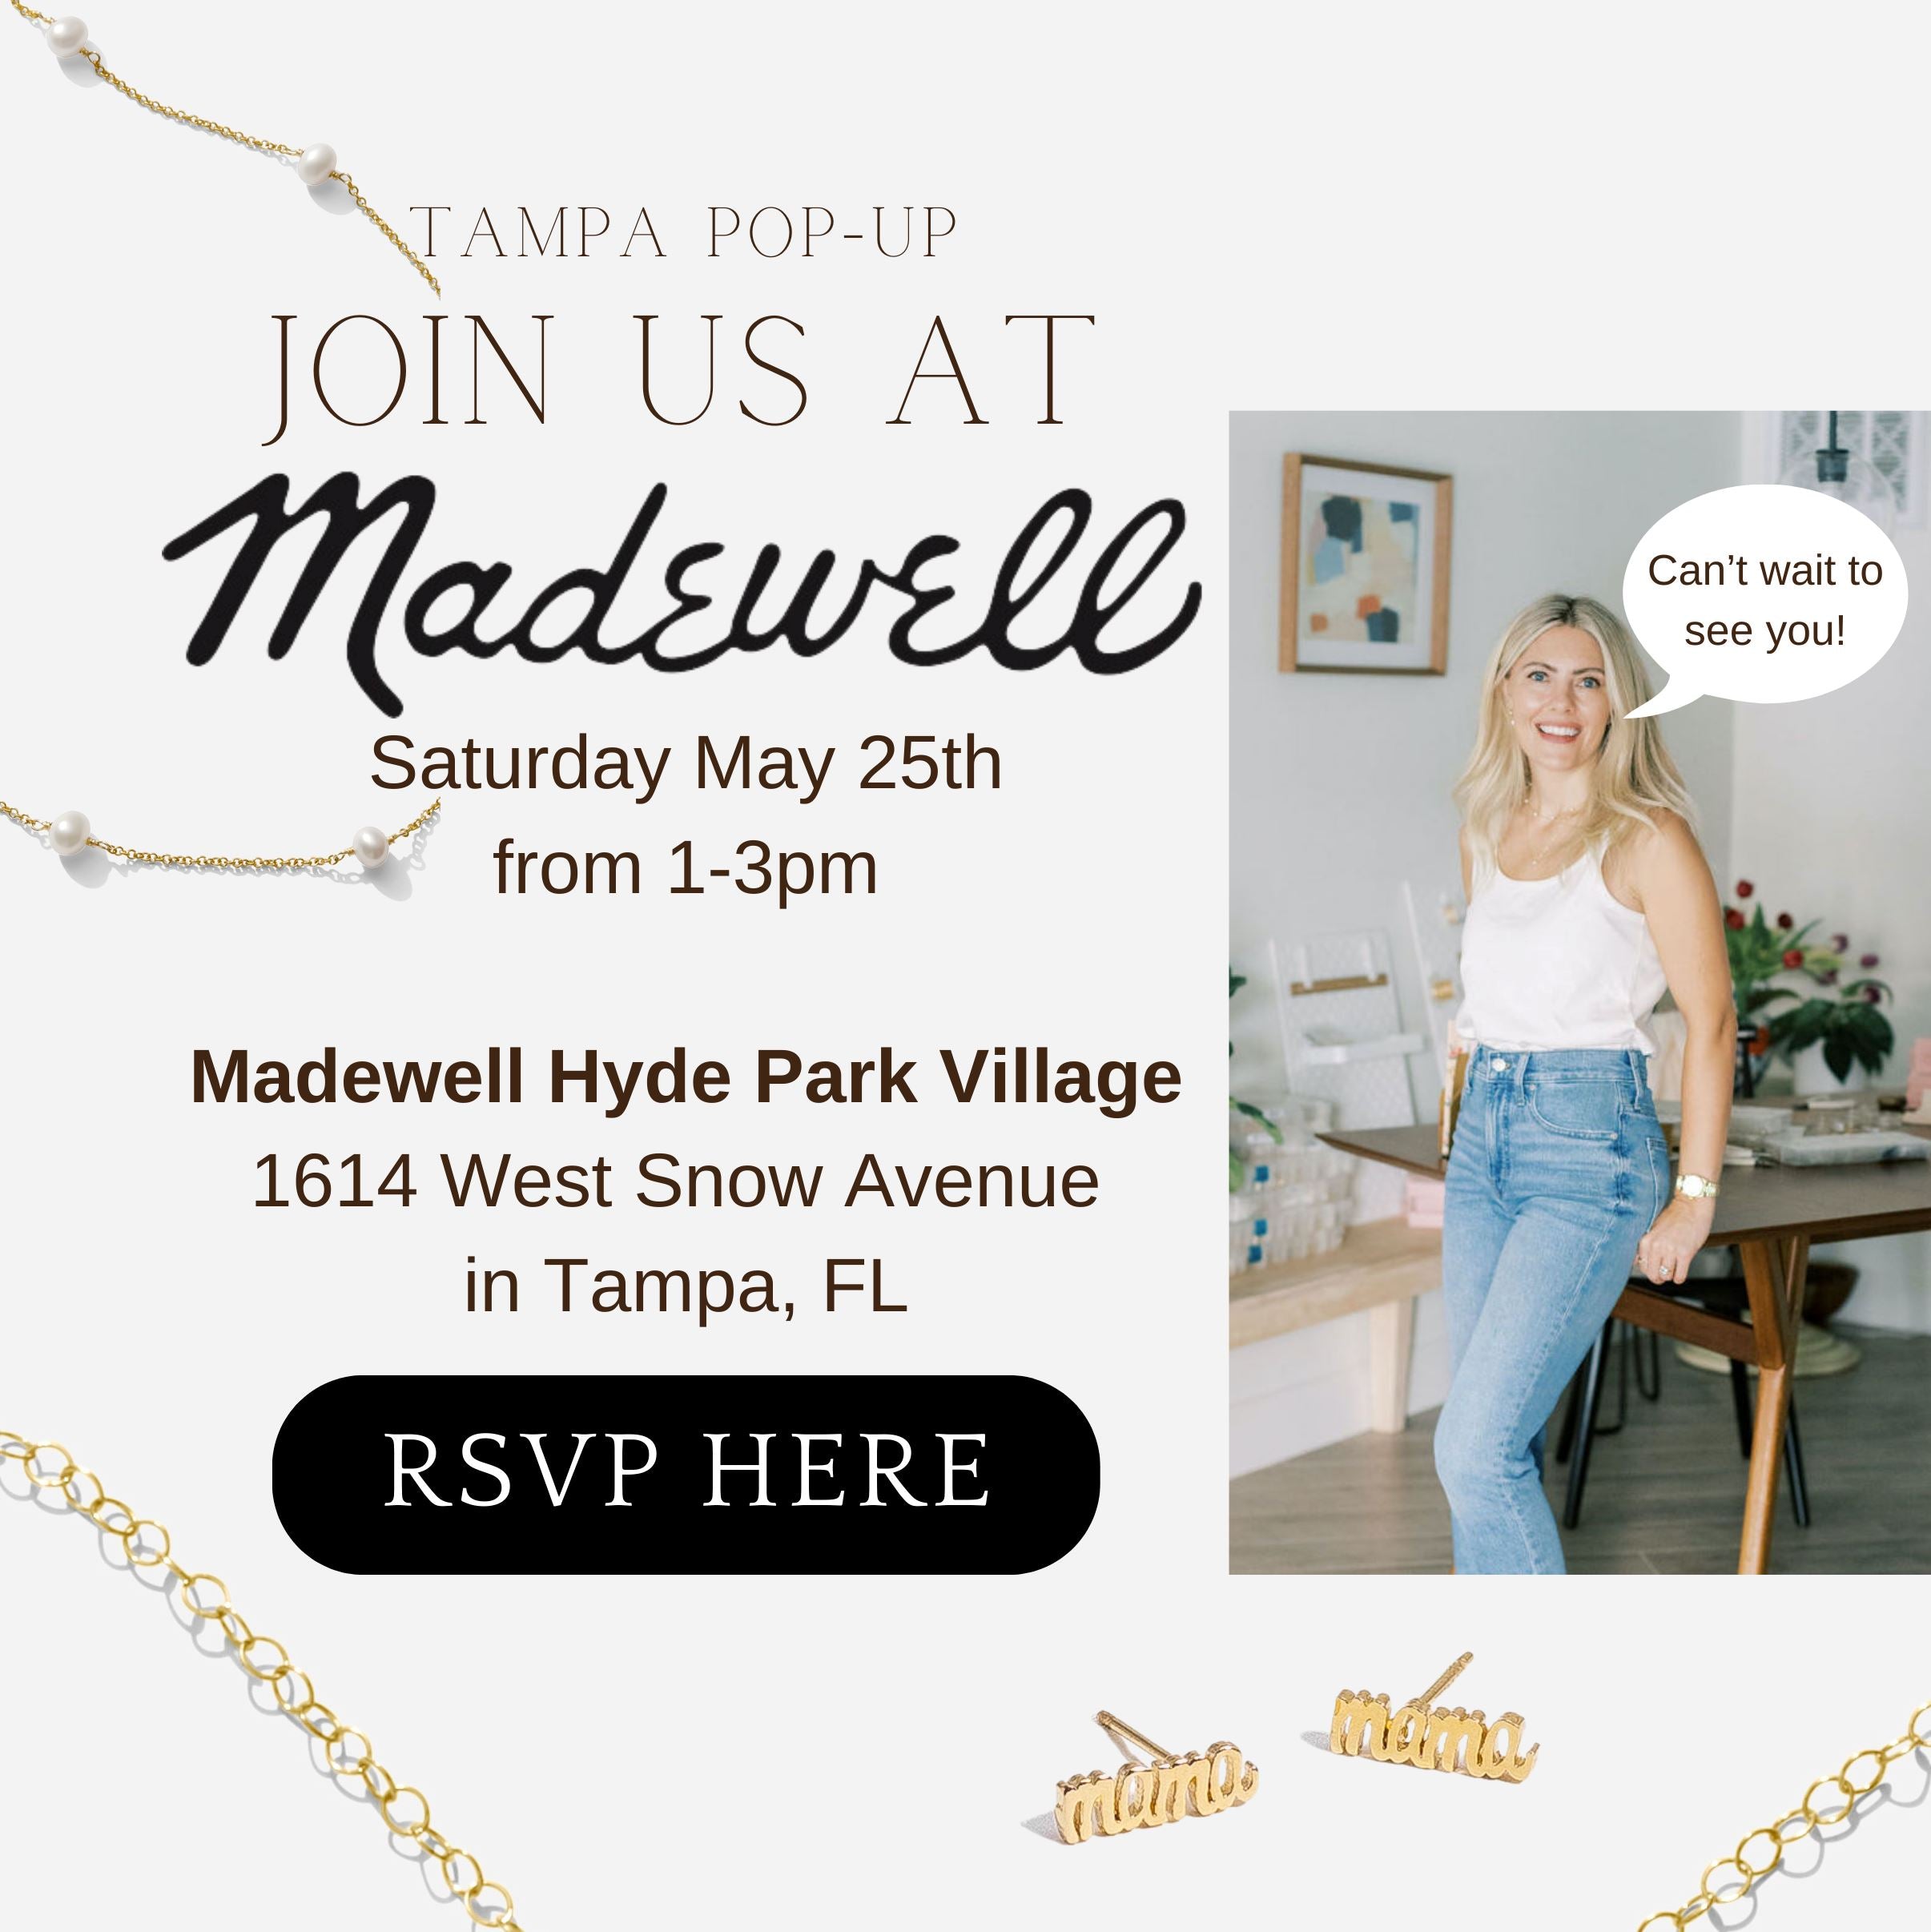 Join Us for our Tampa Pop-Up at Madewell!